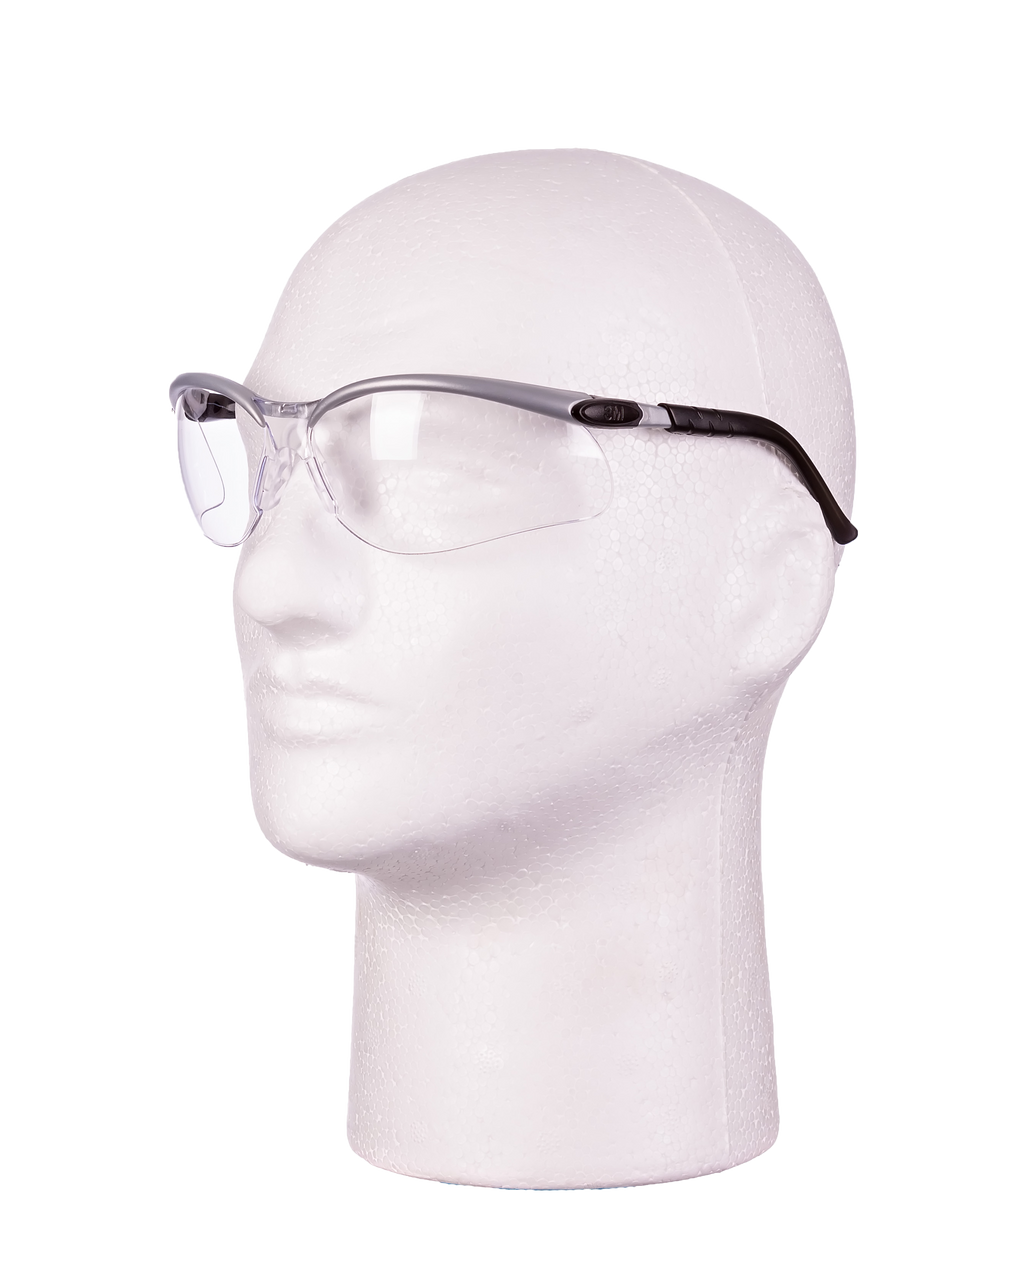 https://cdn11.bigcommerce.com/s-y4b1n34/images/stencil/1280x1280/products/1253/6127/SafetyGlasses__14054.1678902458.png?c=2?imbypass=on